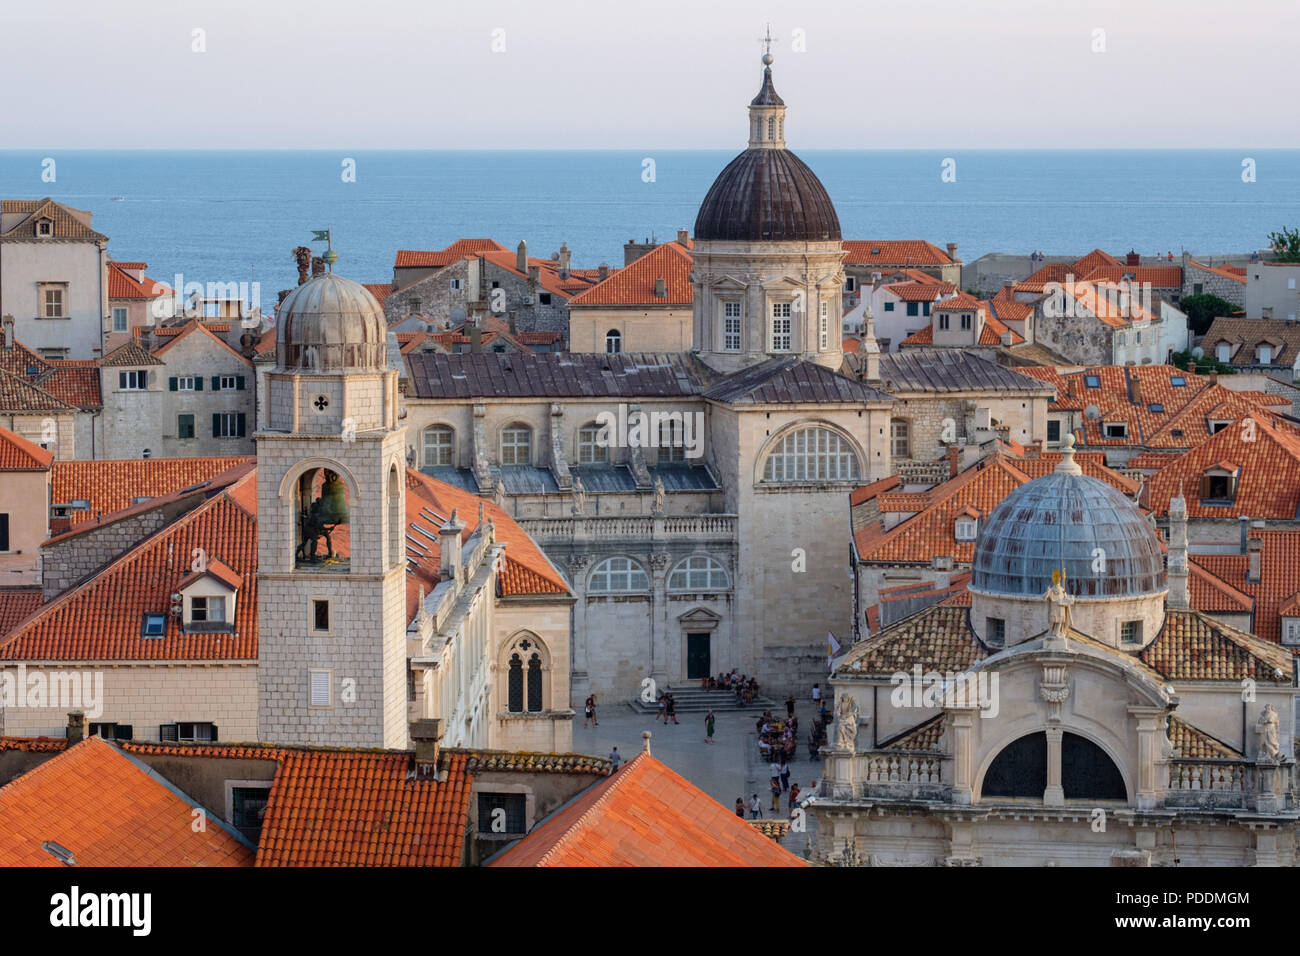 Aerial view of the Bell Tower, Church of Saint Blaise and the Assumption Cathedral in Dubrovnik old town, Croatia, Europe Stock Photo